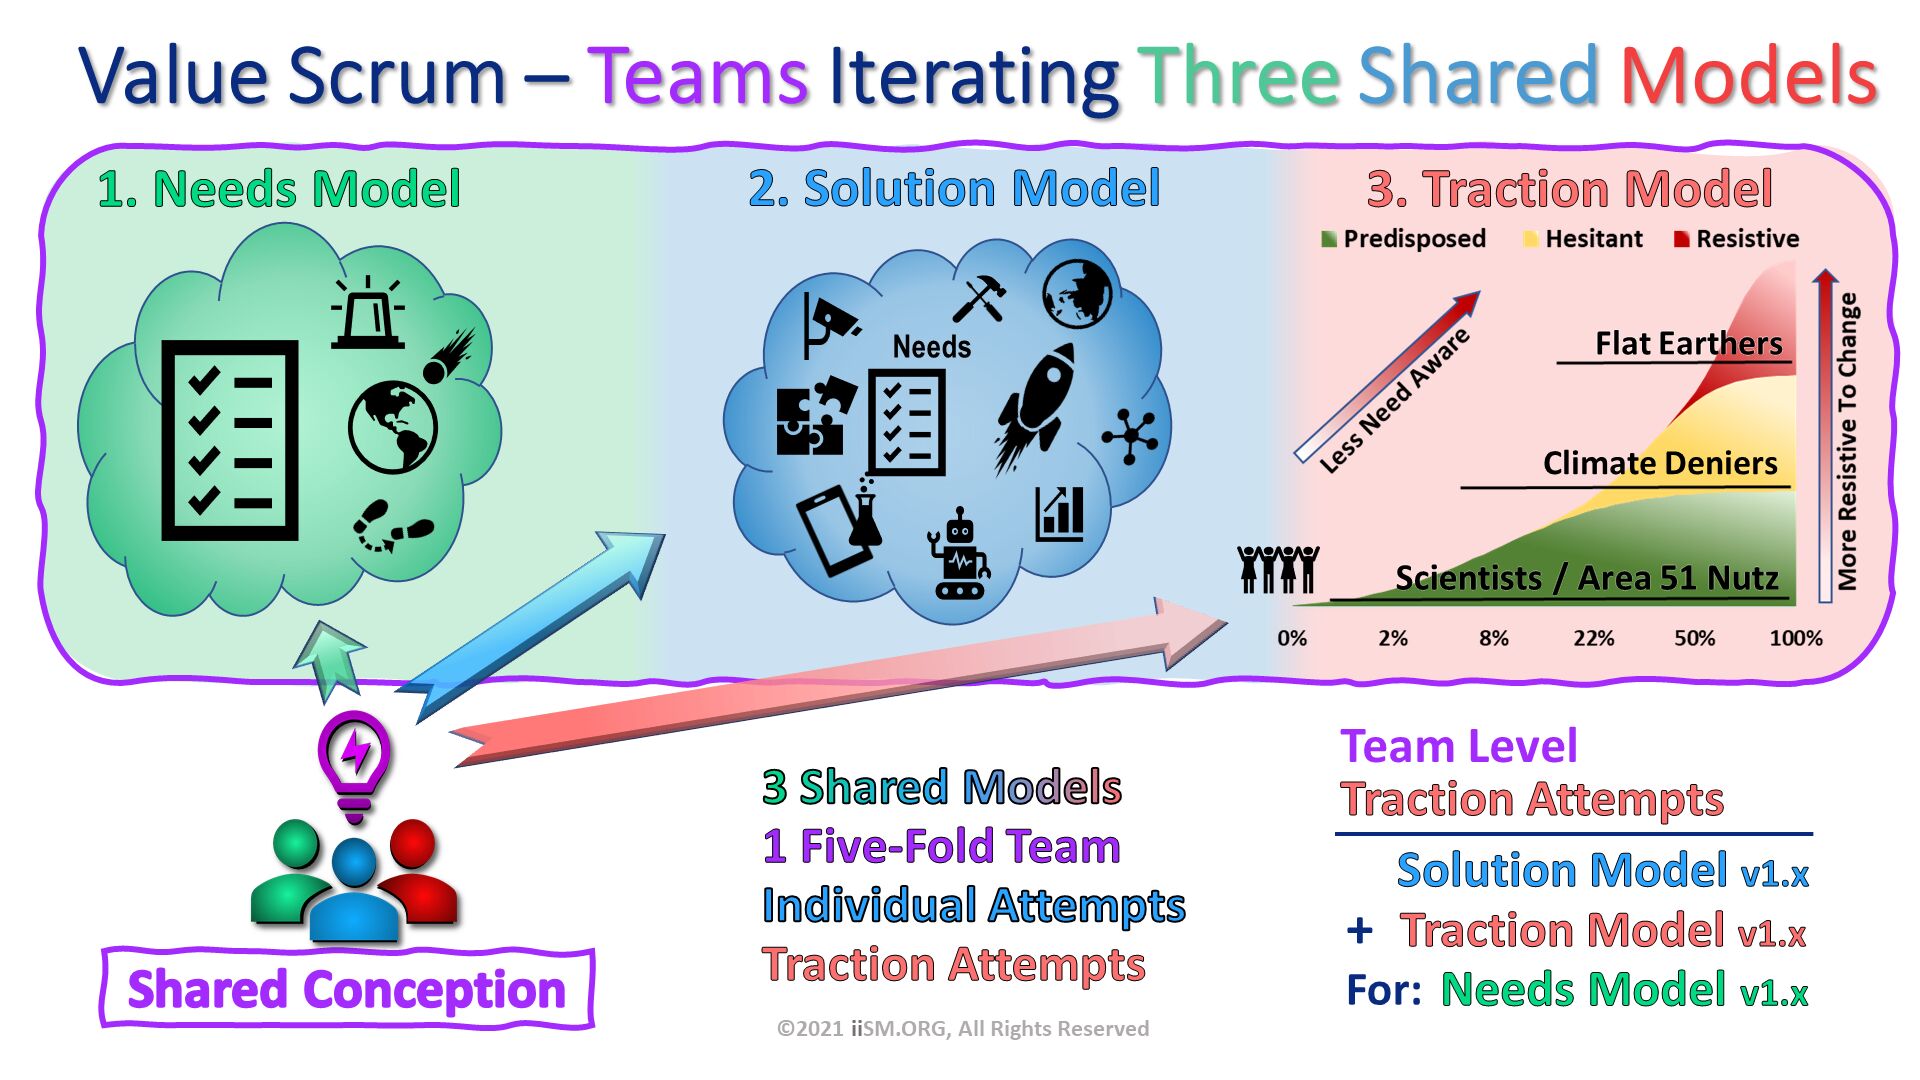 Value Scrum – Teams Iterating Three Shared Models. 3. Traction Model. 1. Needs Model. Shared Conception. Scientists / Area 51 Nutz. Flat Earthers. Climate Deniers. ©2021 iiSM.ORG, All Rights Reserved. 3 Shared Models
1 Five-Fold Team
Individual Attempts
Traction Attempts. 